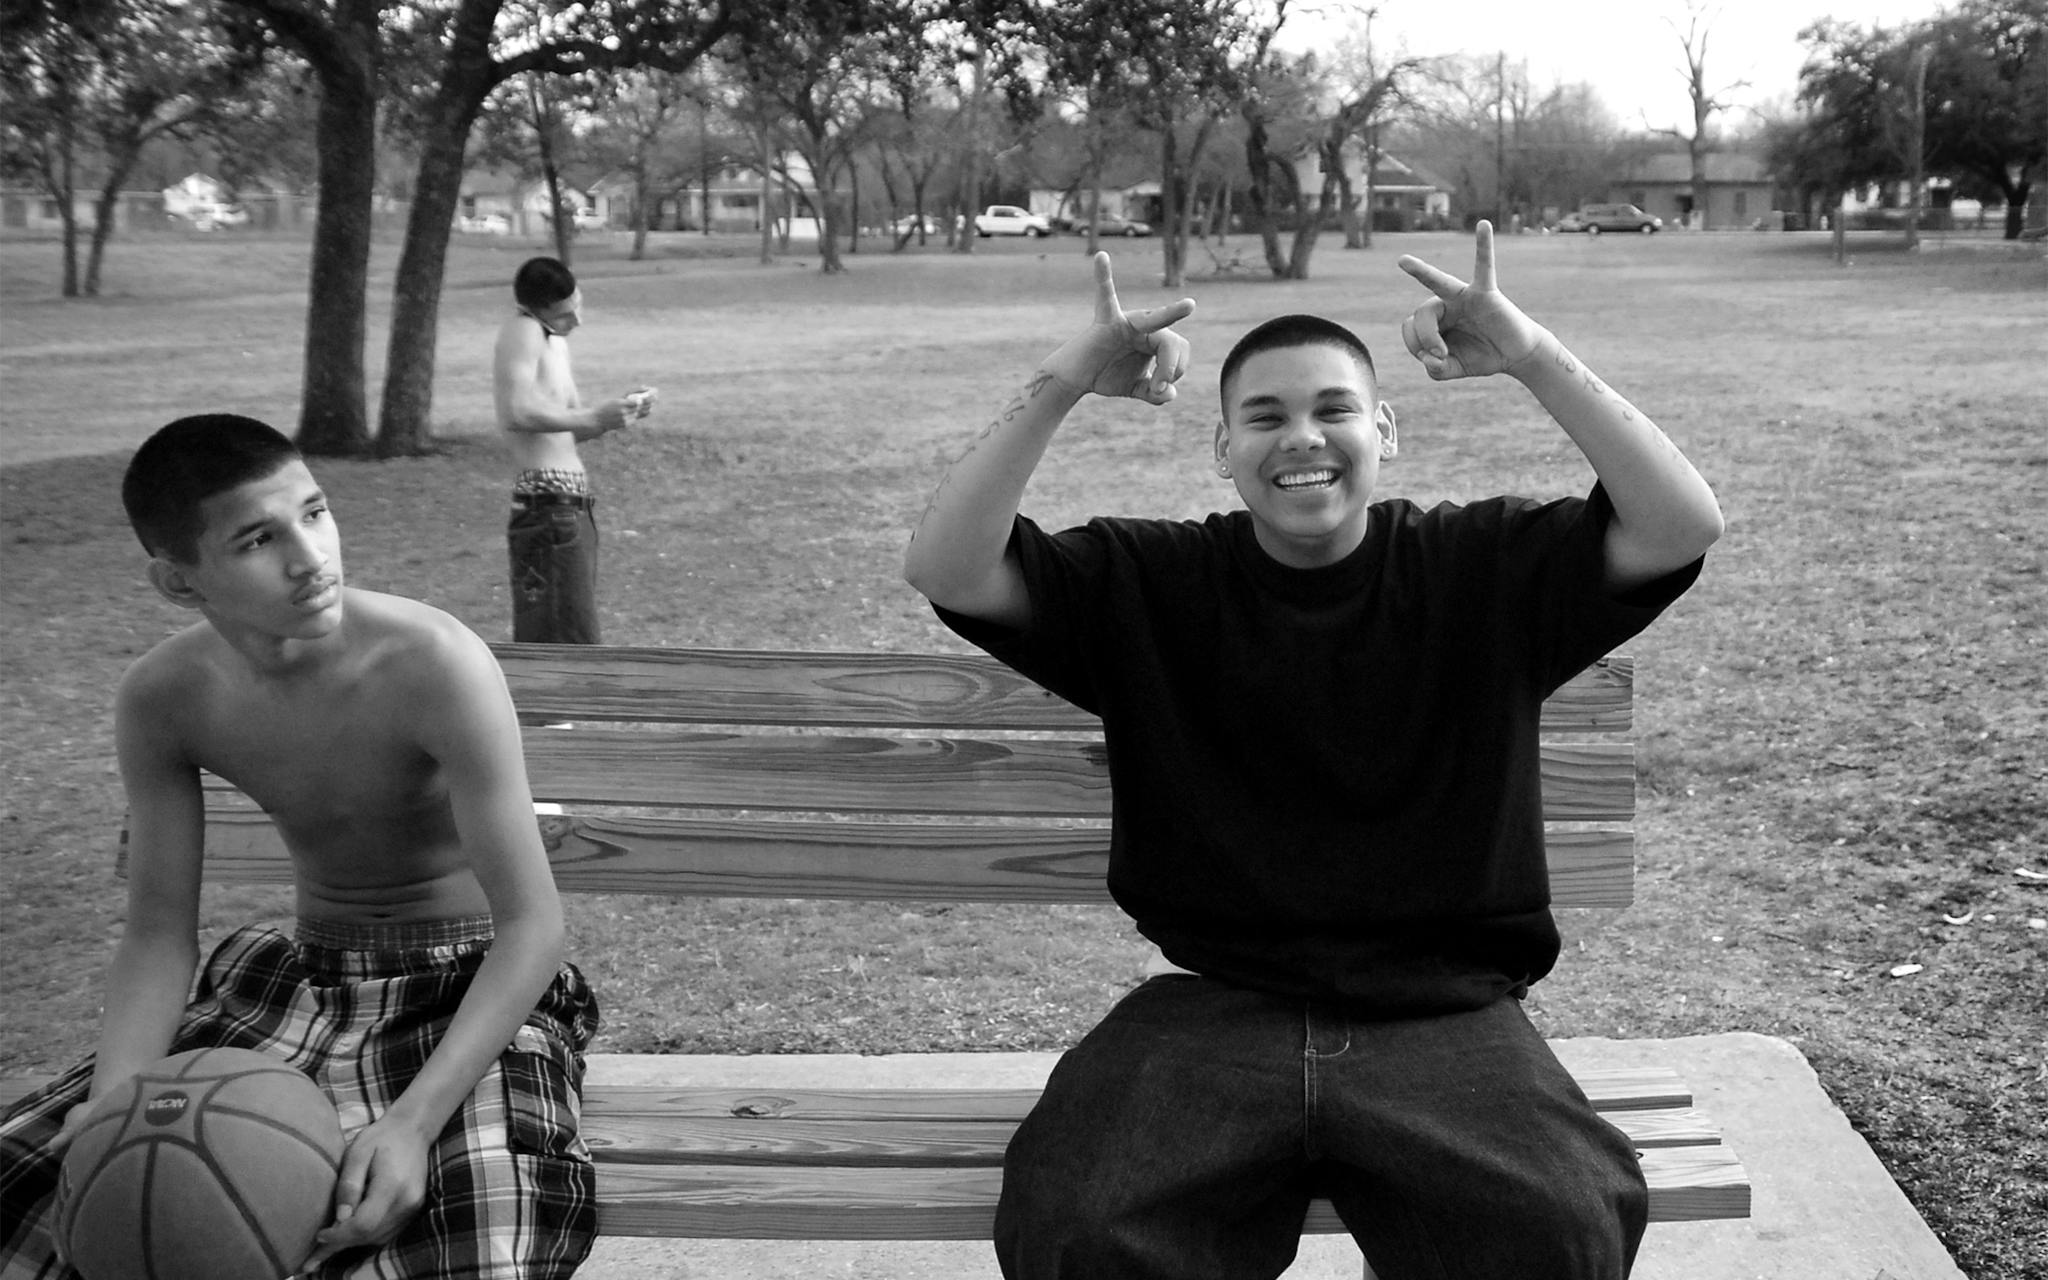 Christian with Josh Fabela, who is flashing the “0-2” sign, across the street from Booker T. on February 25, 2009.